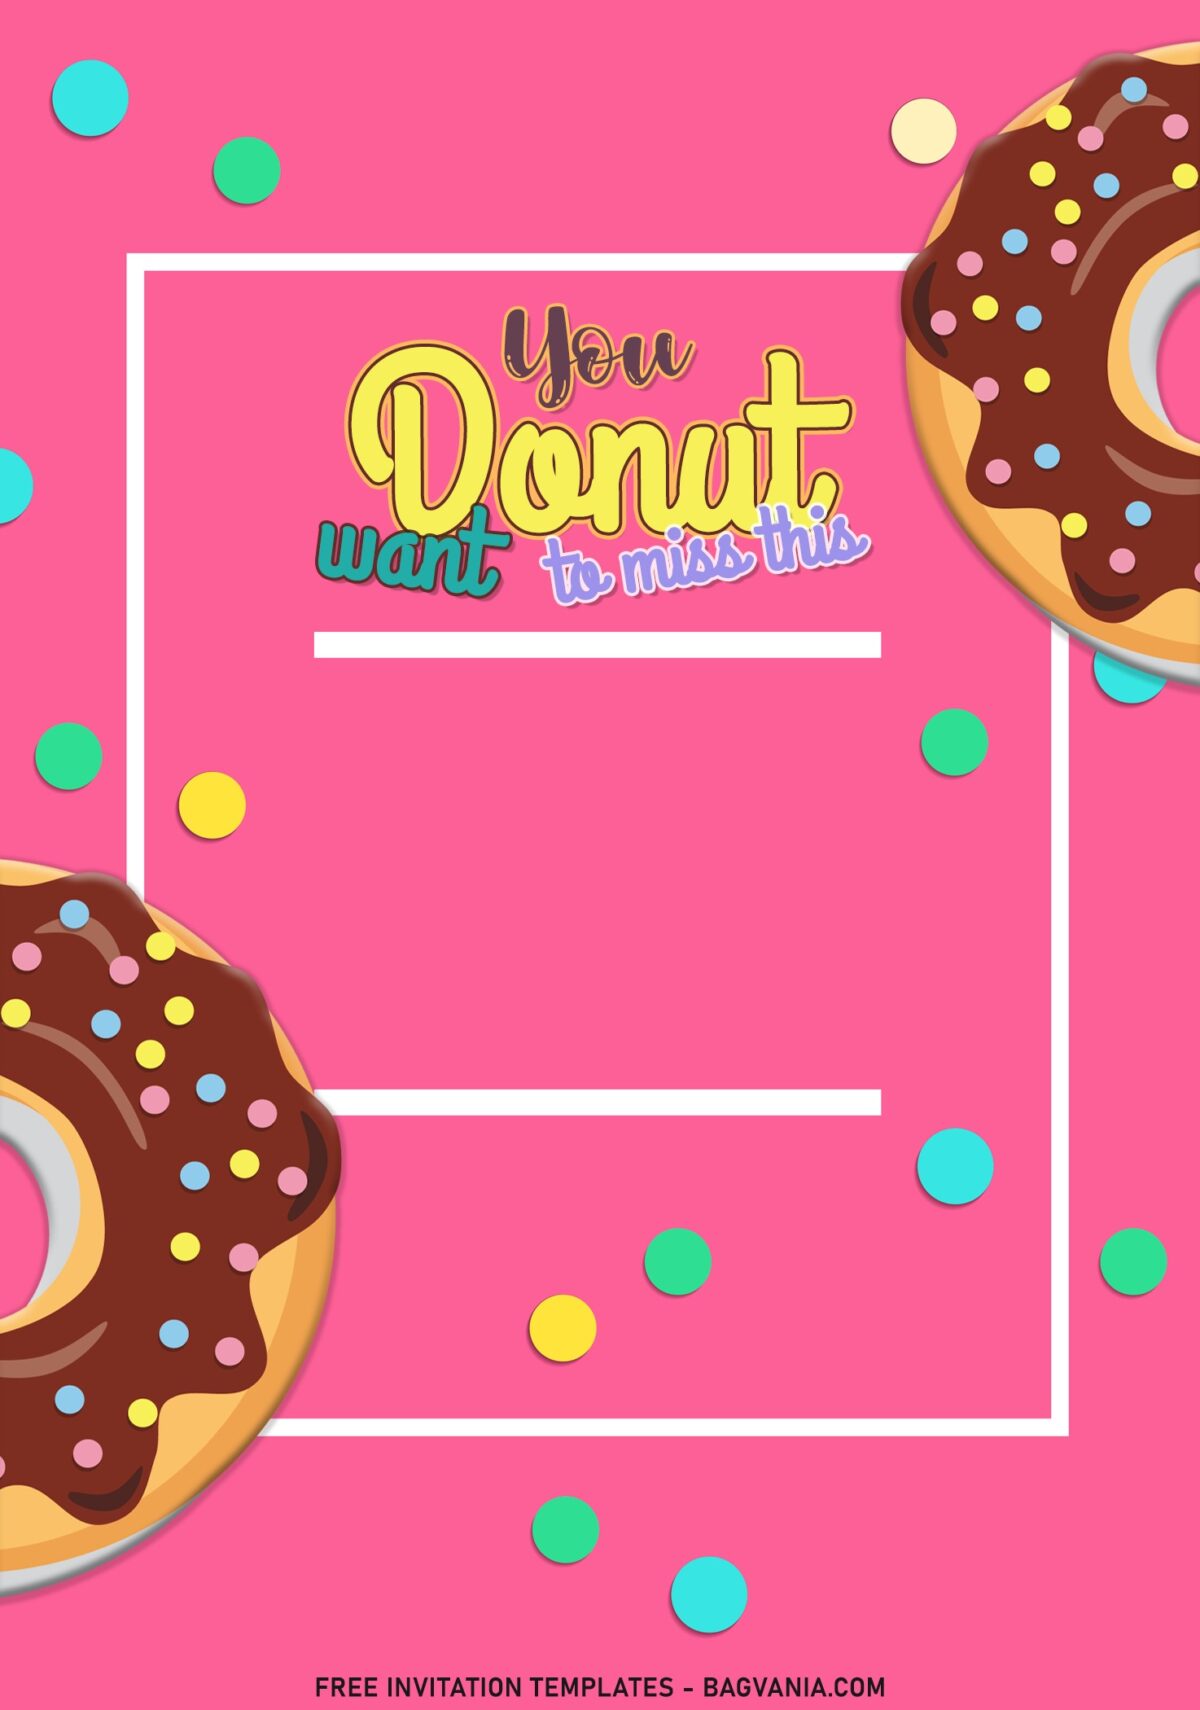 7+ Donut And Sprinkle Invitation Templates For Your Cute Little Girl's Birthday with colorful sprinkles